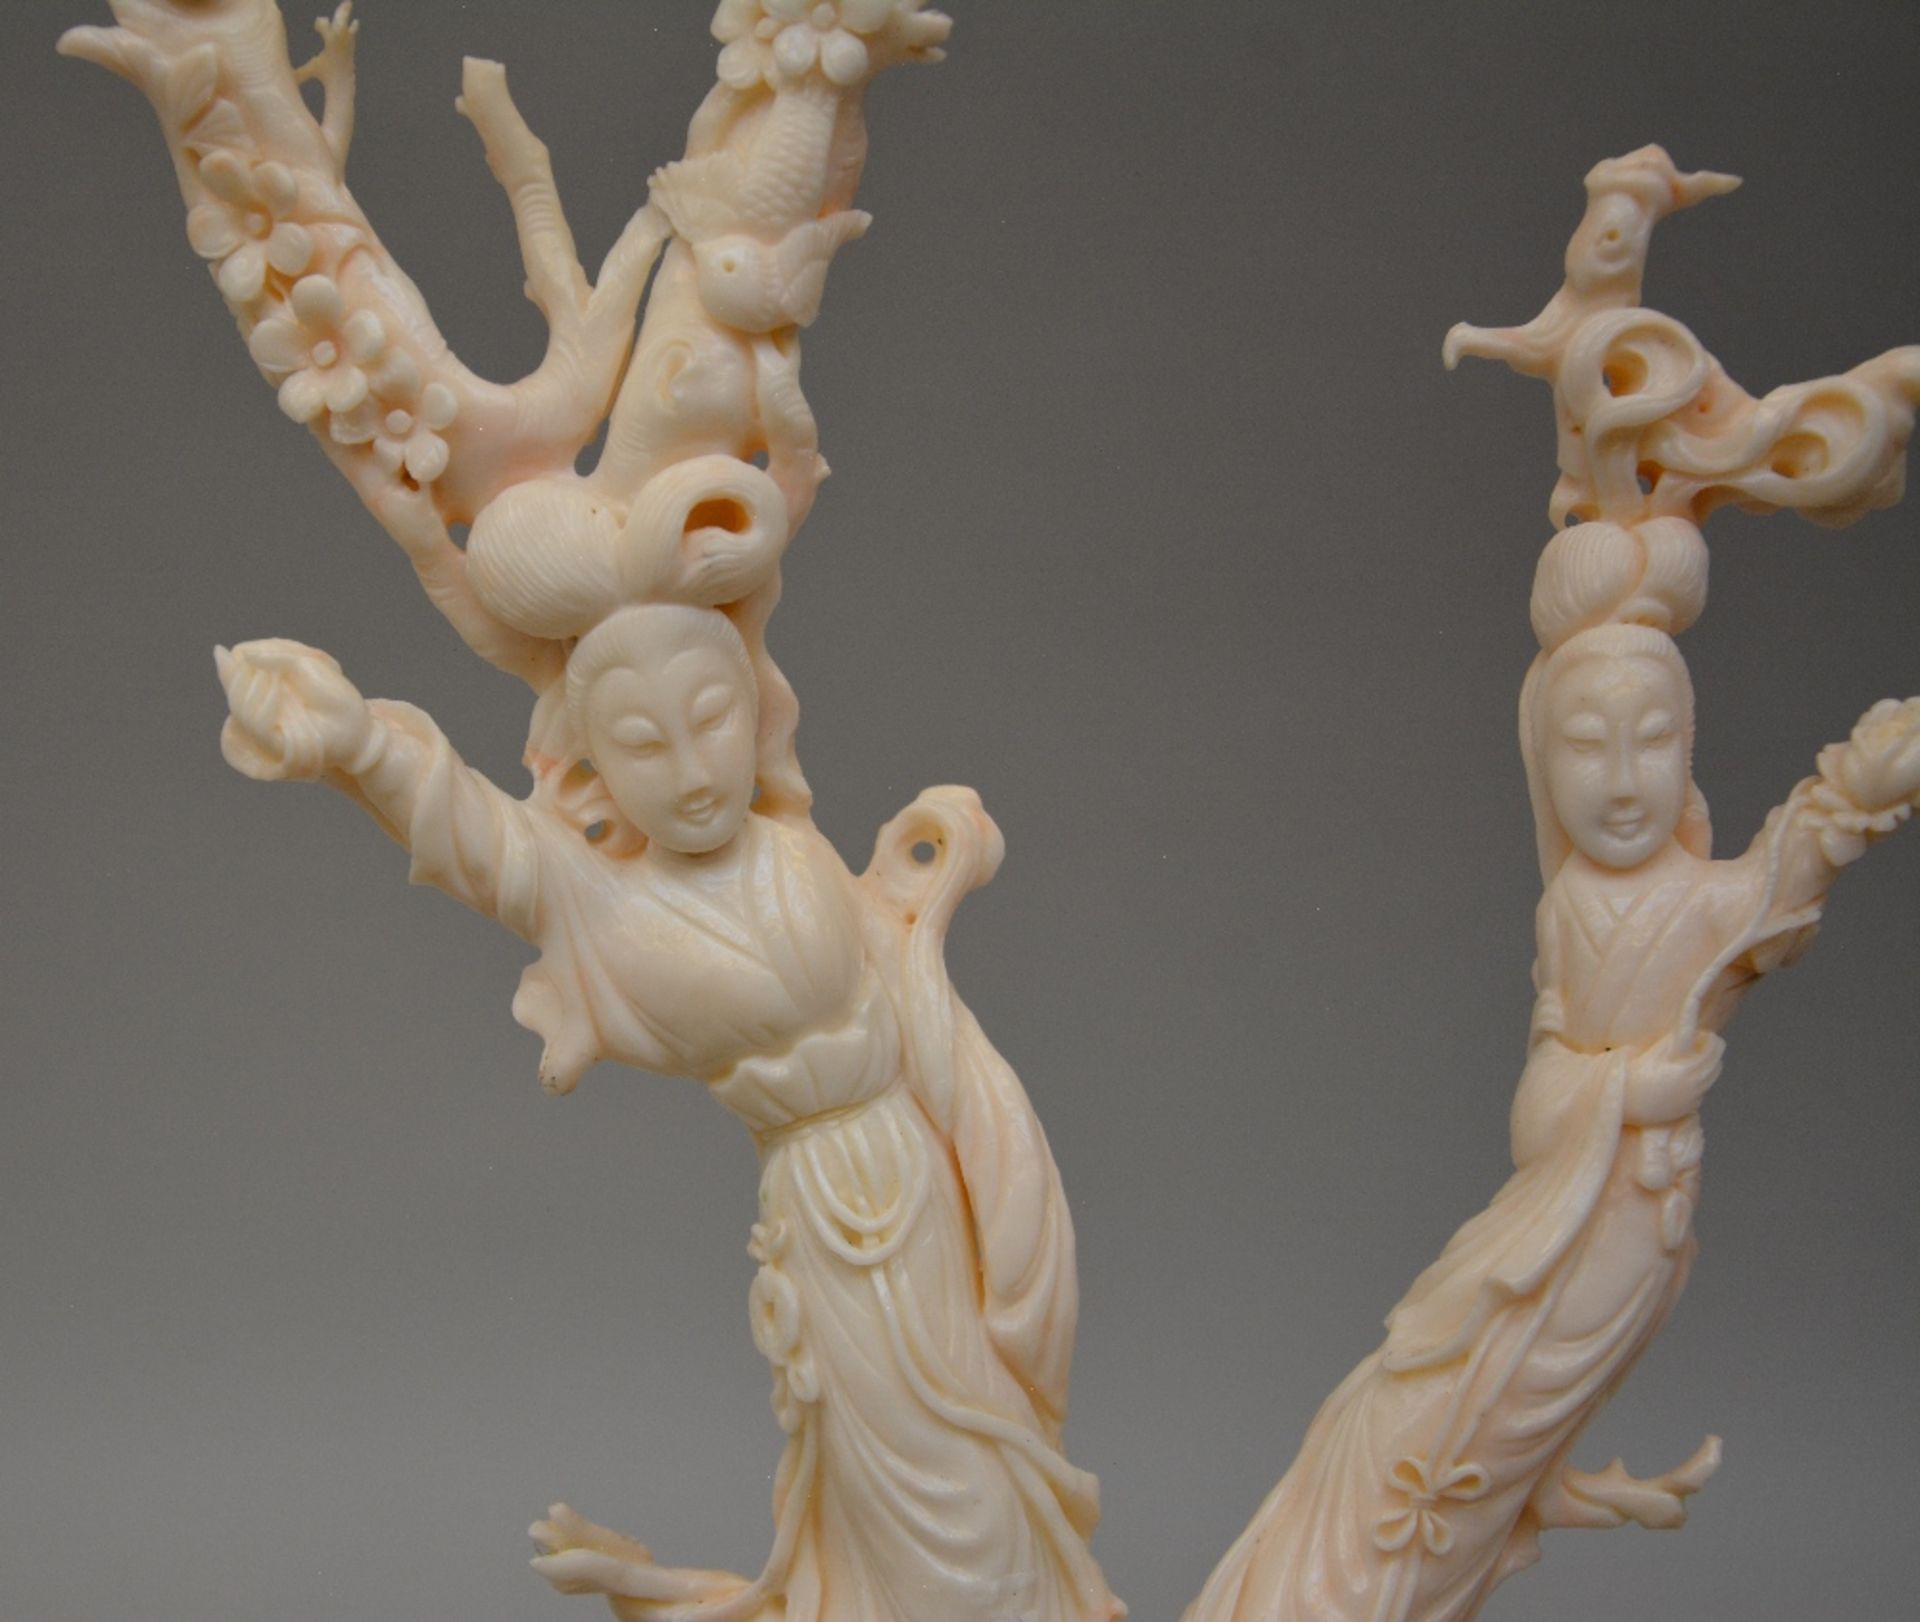 A Chinese white coral sculpture carved with figures, birds and flowers, on a wooden base, H 45 - Bild 6 aus 9